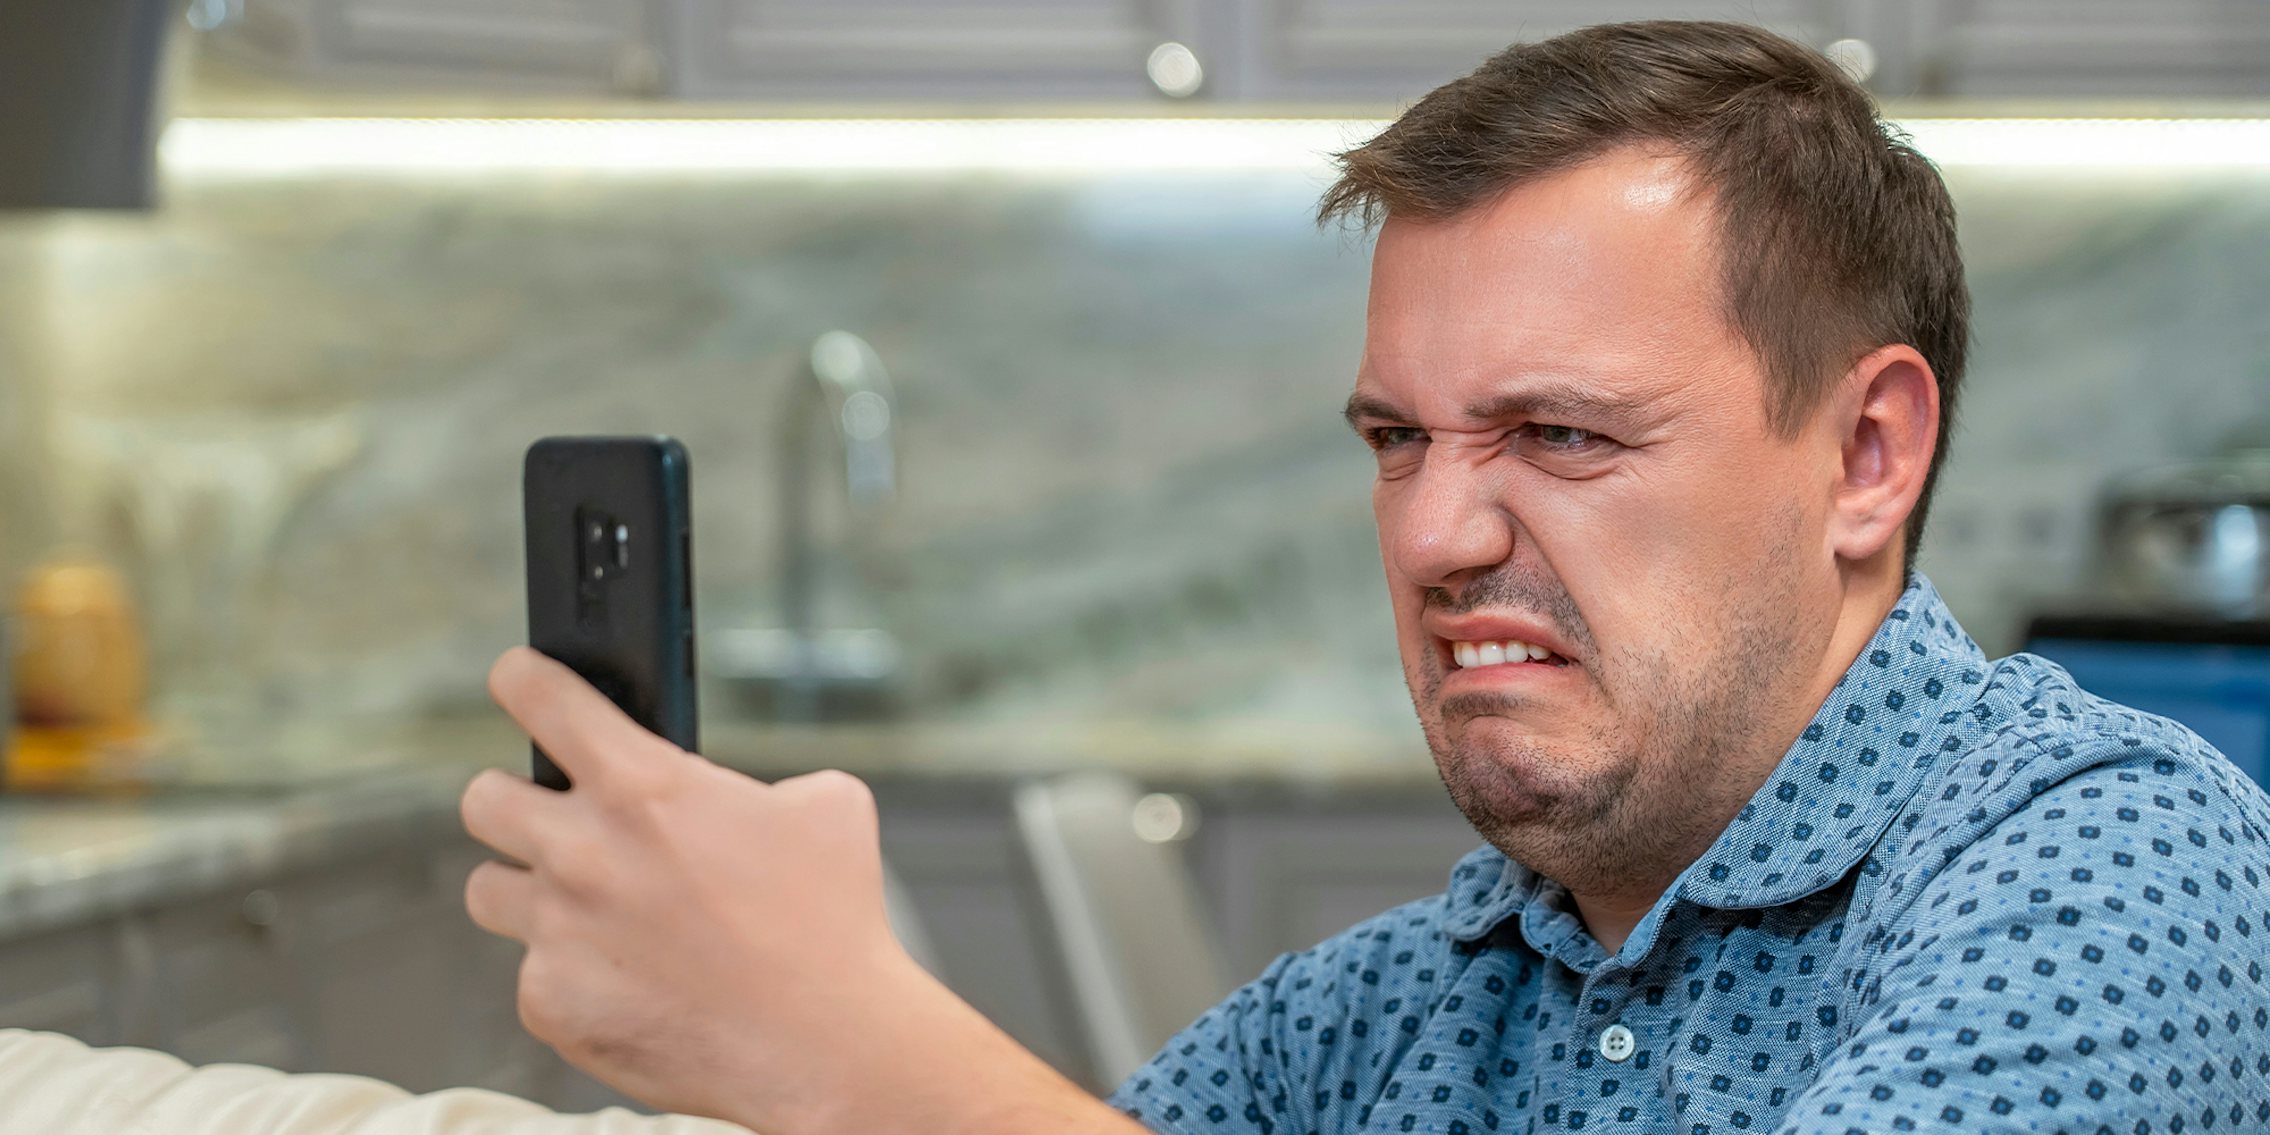 What is cringe? Portrait of man with cringe and looking at phone screen with squeamishness, bad joke or inappropriate content.